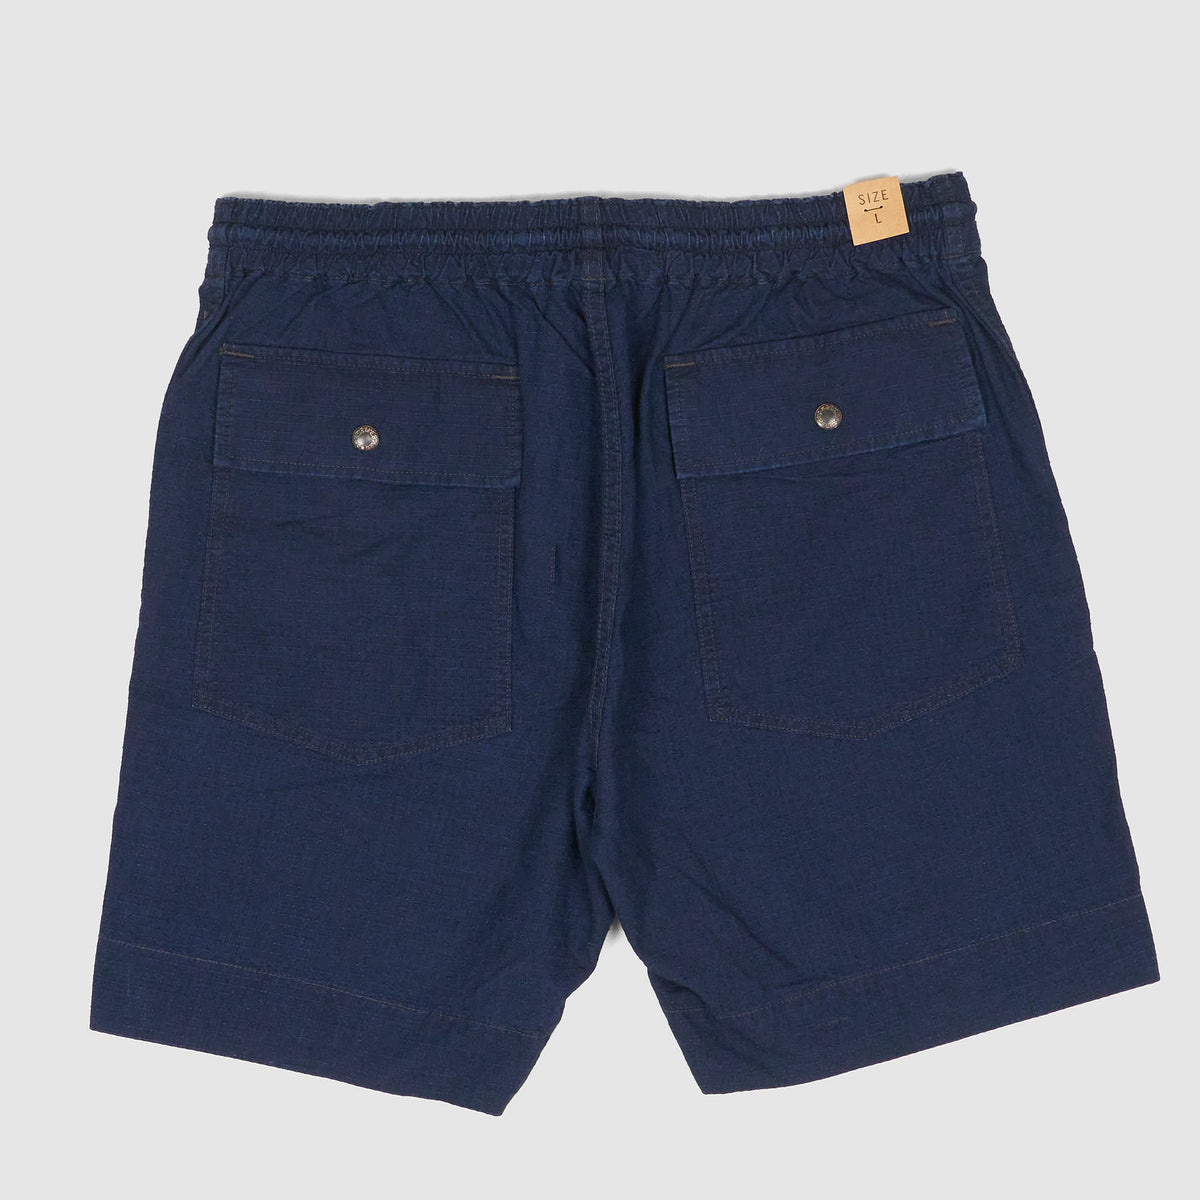 Double RL Army Utility Flat Front Short